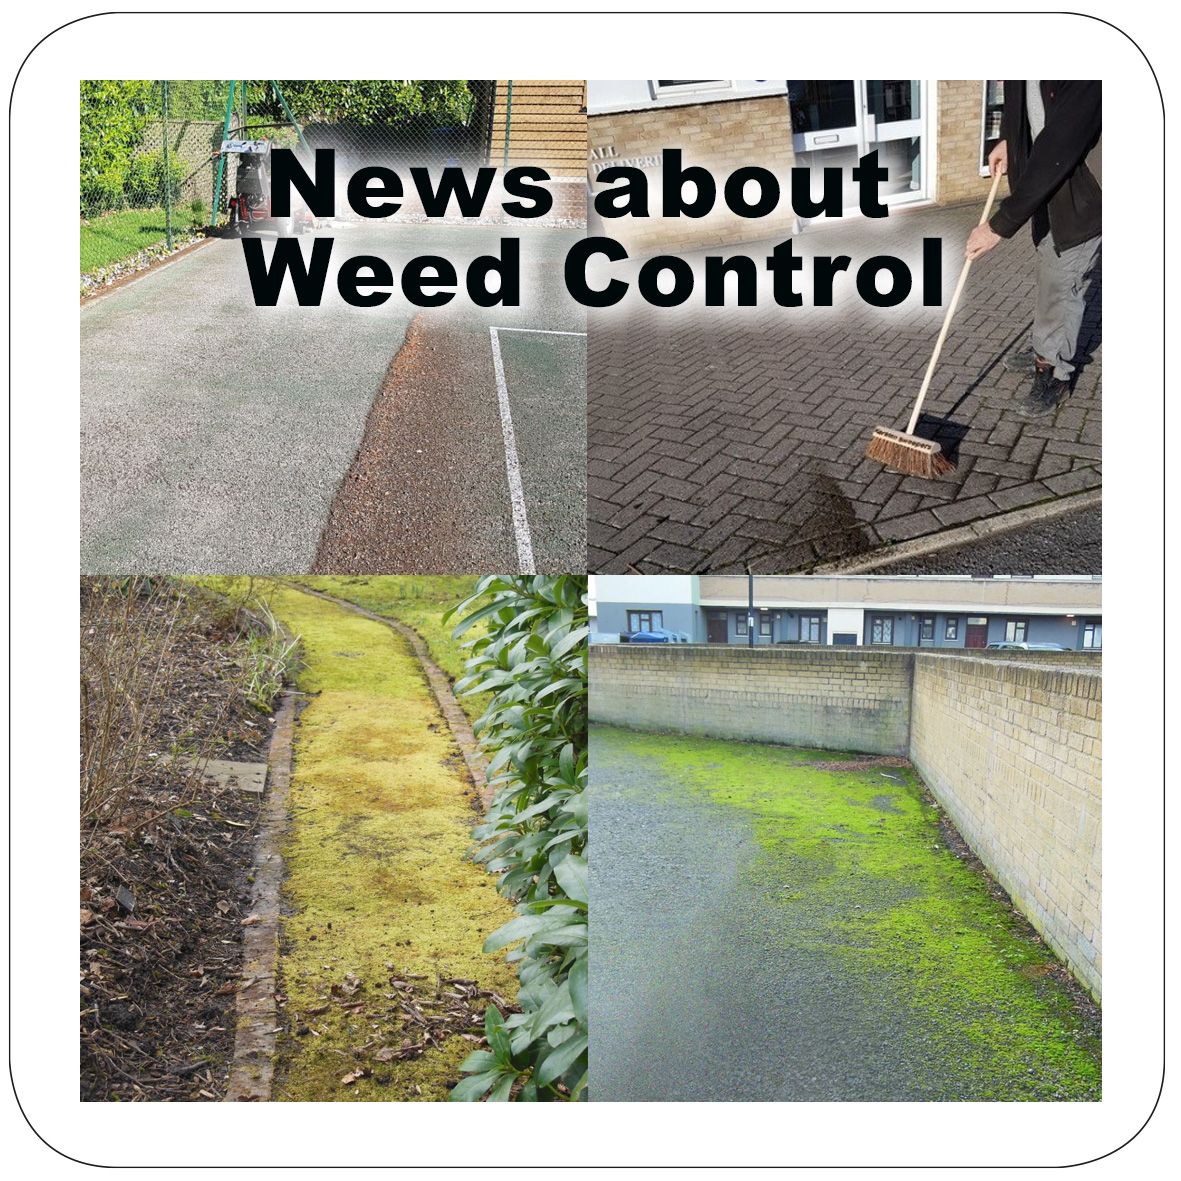 News about Weed Control